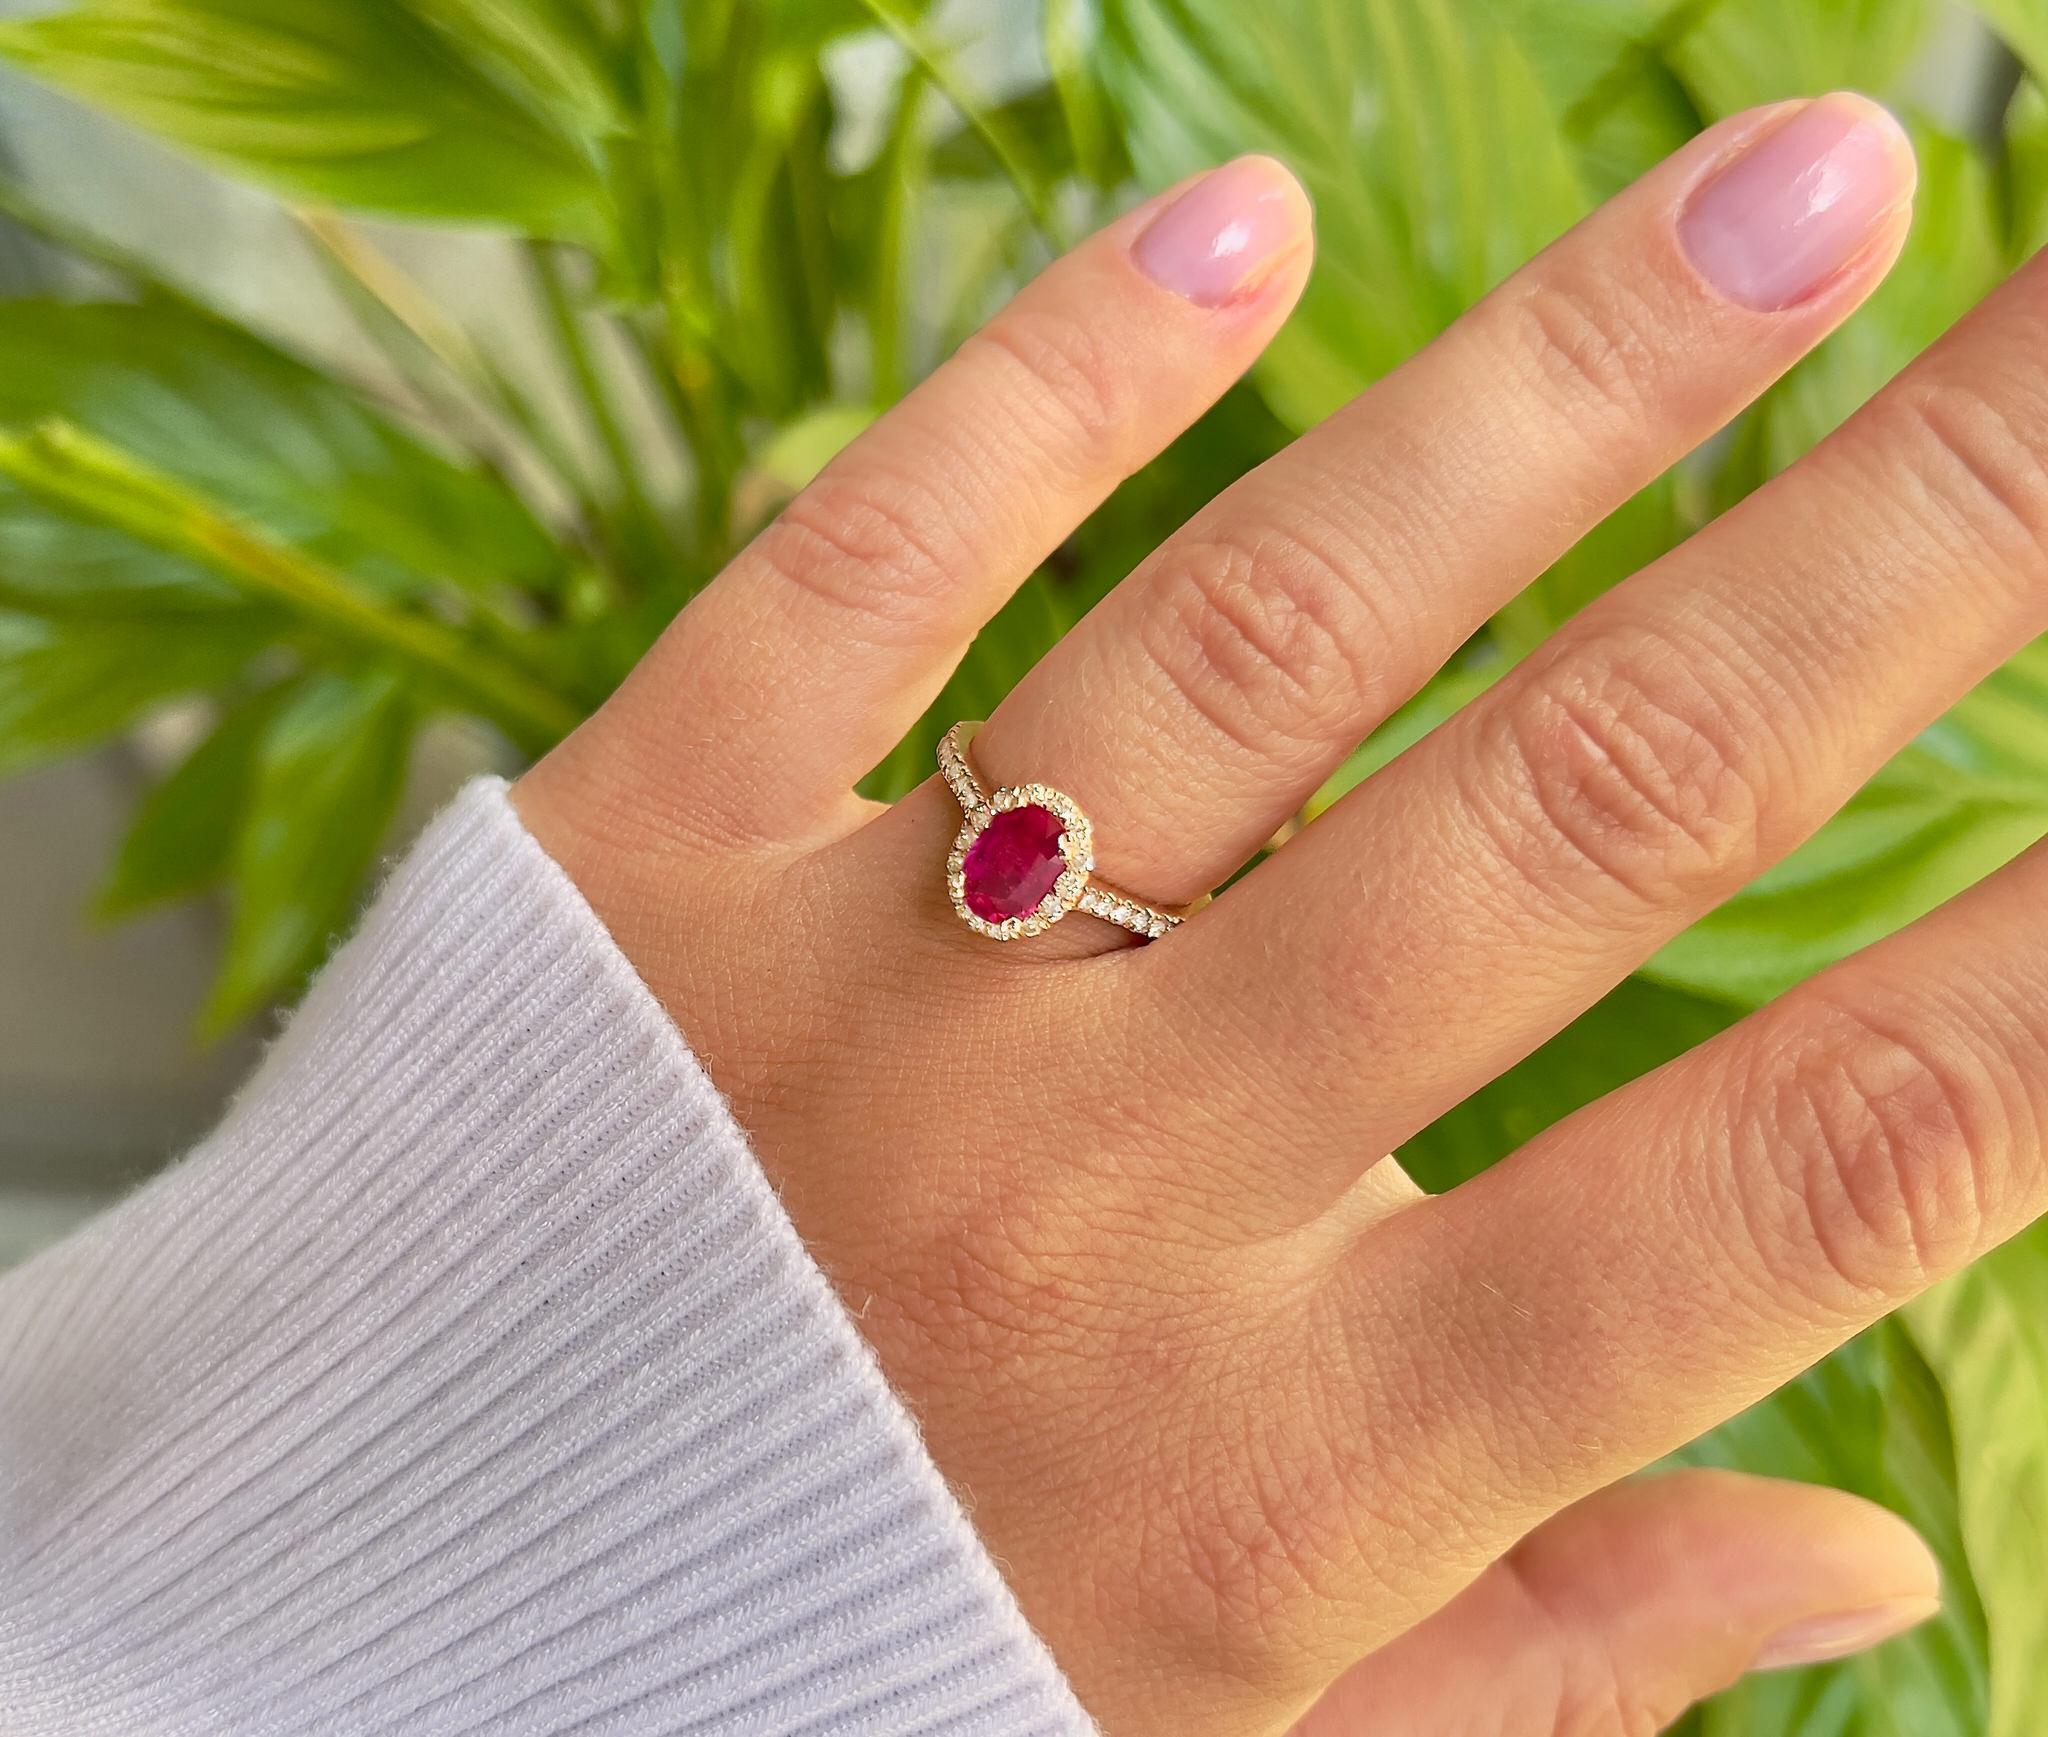 It comes with the GIA Certificate
Condition: Excellent
Natural Unheated Ruby = 1.10 Carat
(Cut: Oval, Color: Red)
Diamonds = 0.45 Carats
(Color: F-G, Clarity: VVS-VS)
Metal: 14K Rose Gold
Ring Size: 6.25* US
*It can be resized complimentary